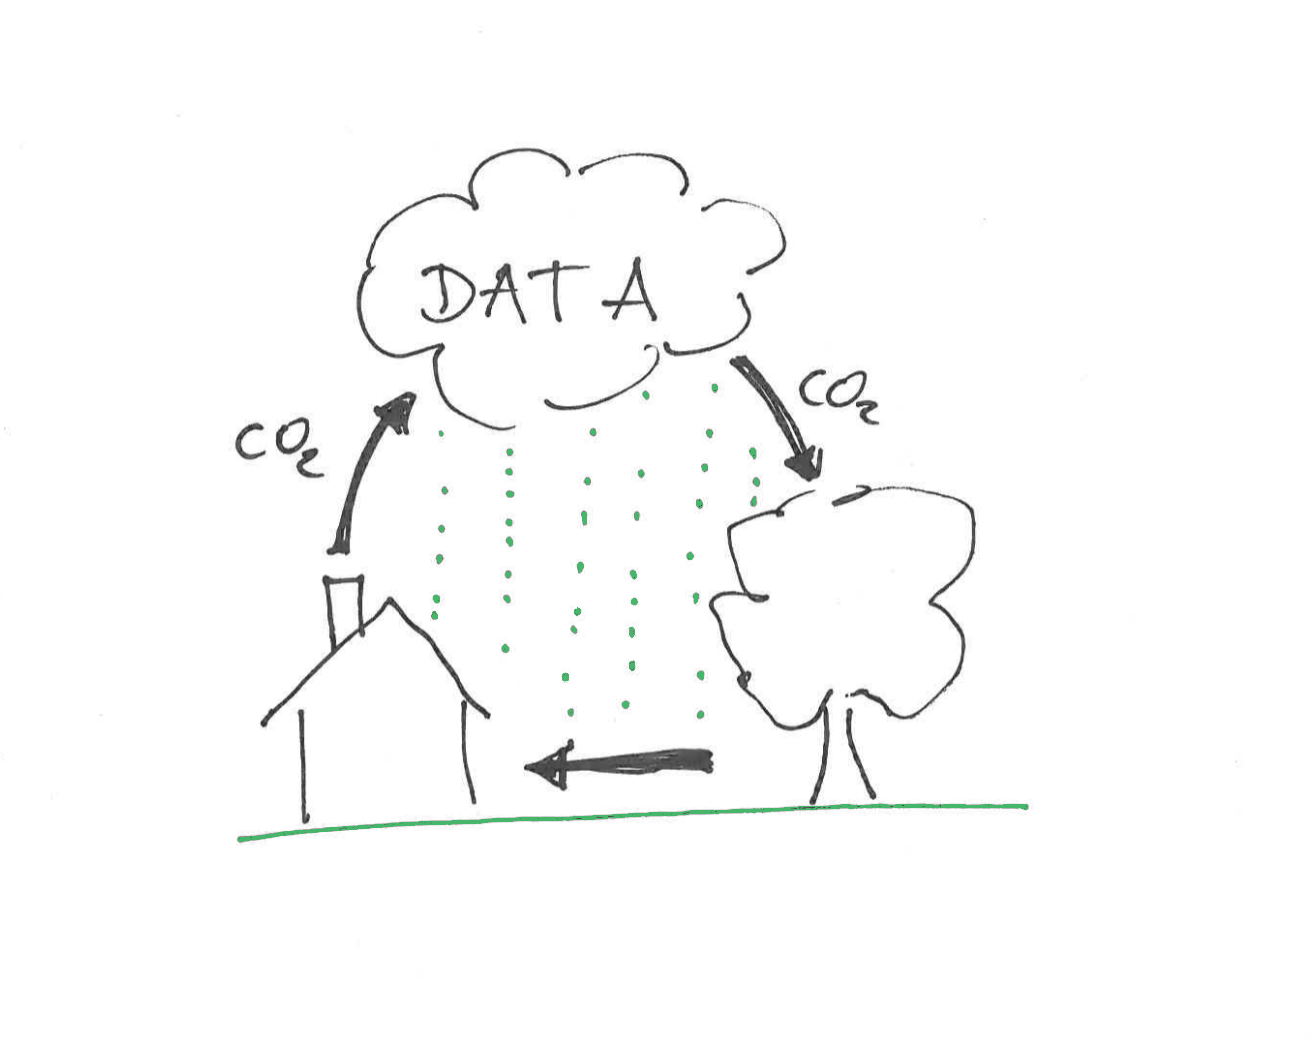 House - cloud - tree cycle with data flying all over the place